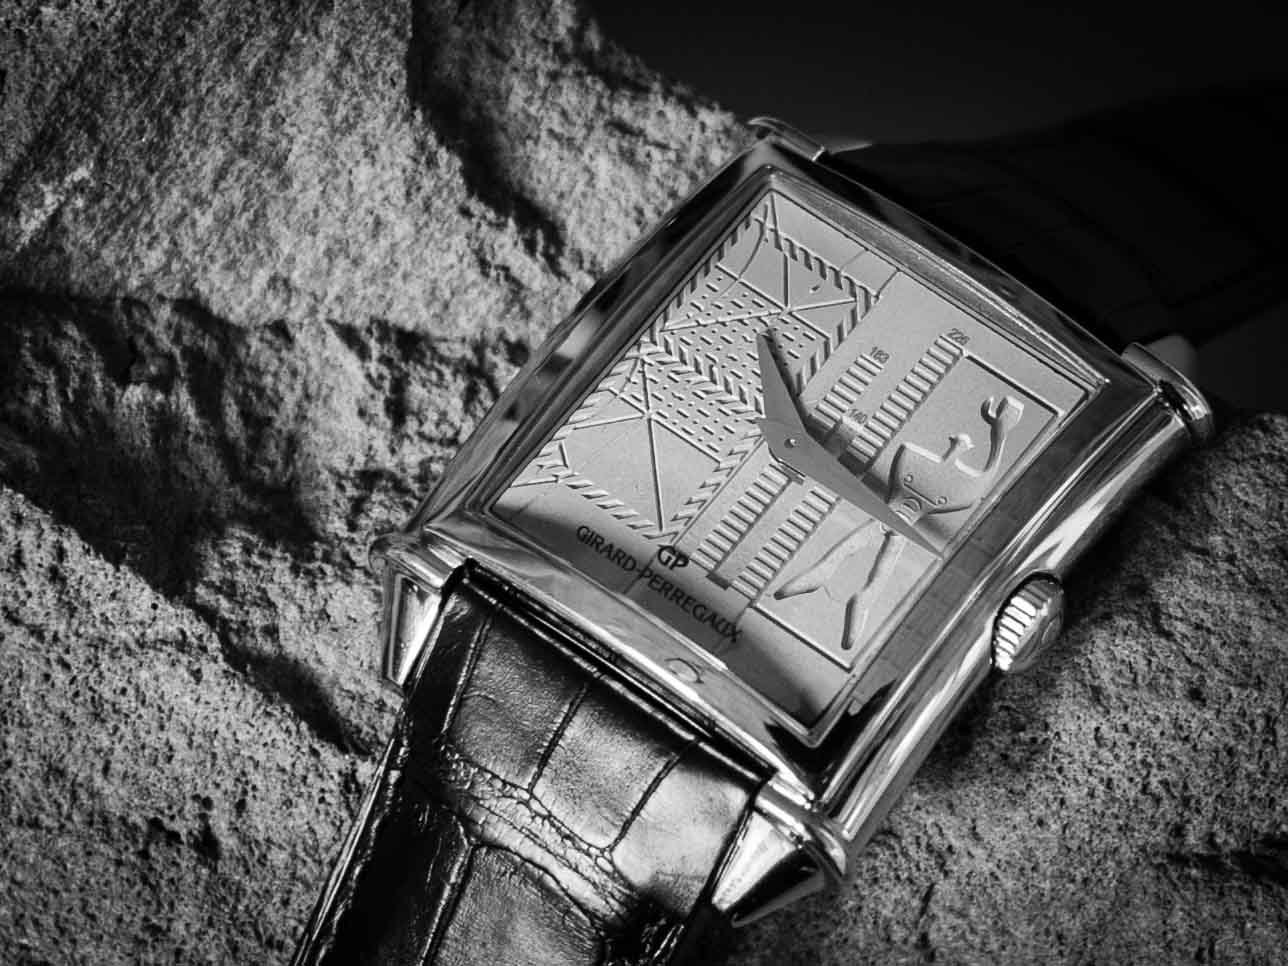 Introducing The Girard-Perregaux Vintage 1945 Le Corbusier Limited Edition, A Steel Watch With A Concrete Dial